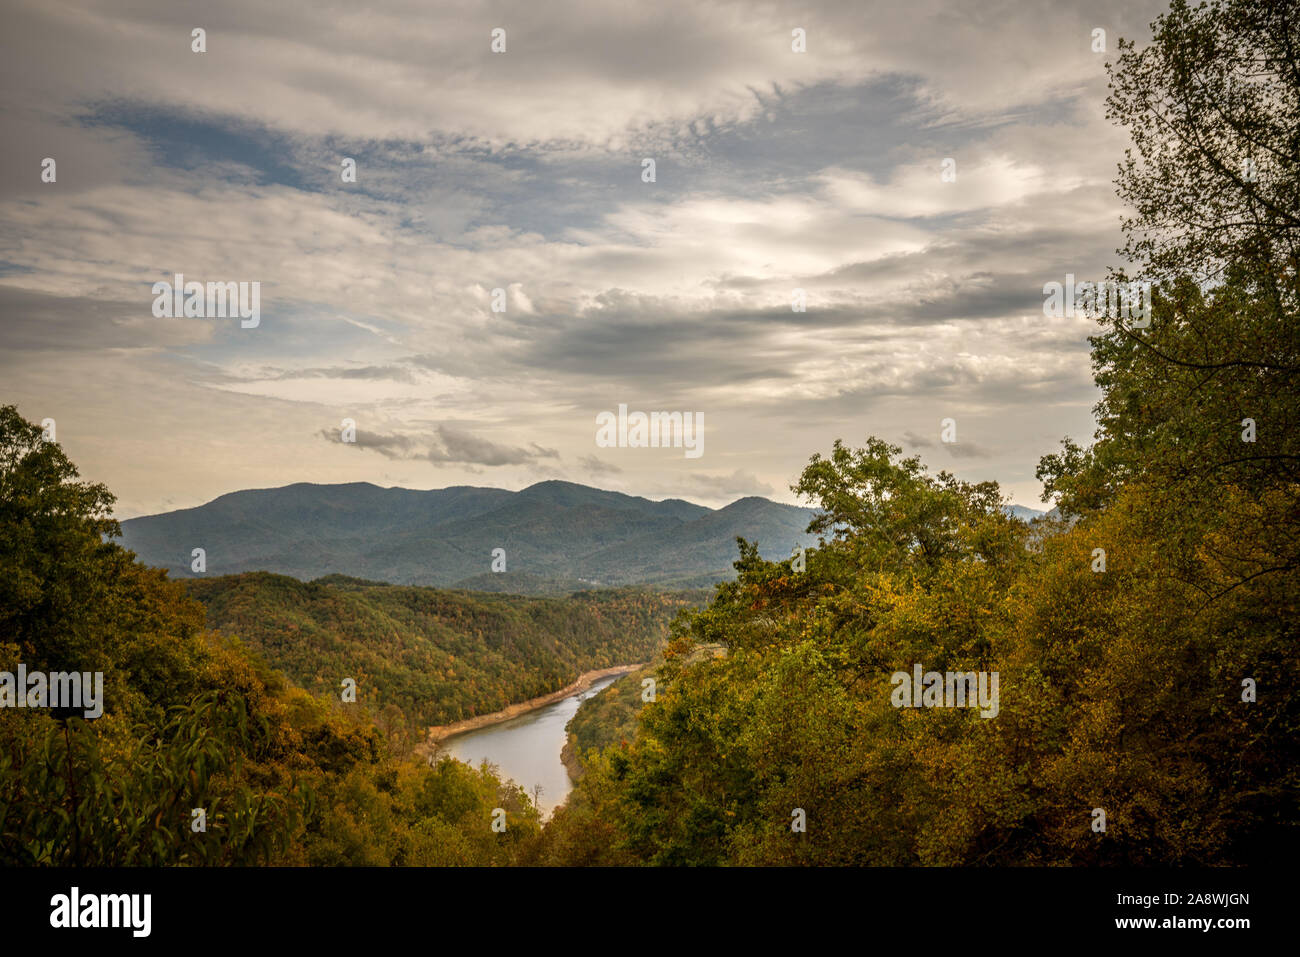 View of lake and mountains with cloudy sky. Stock Photo